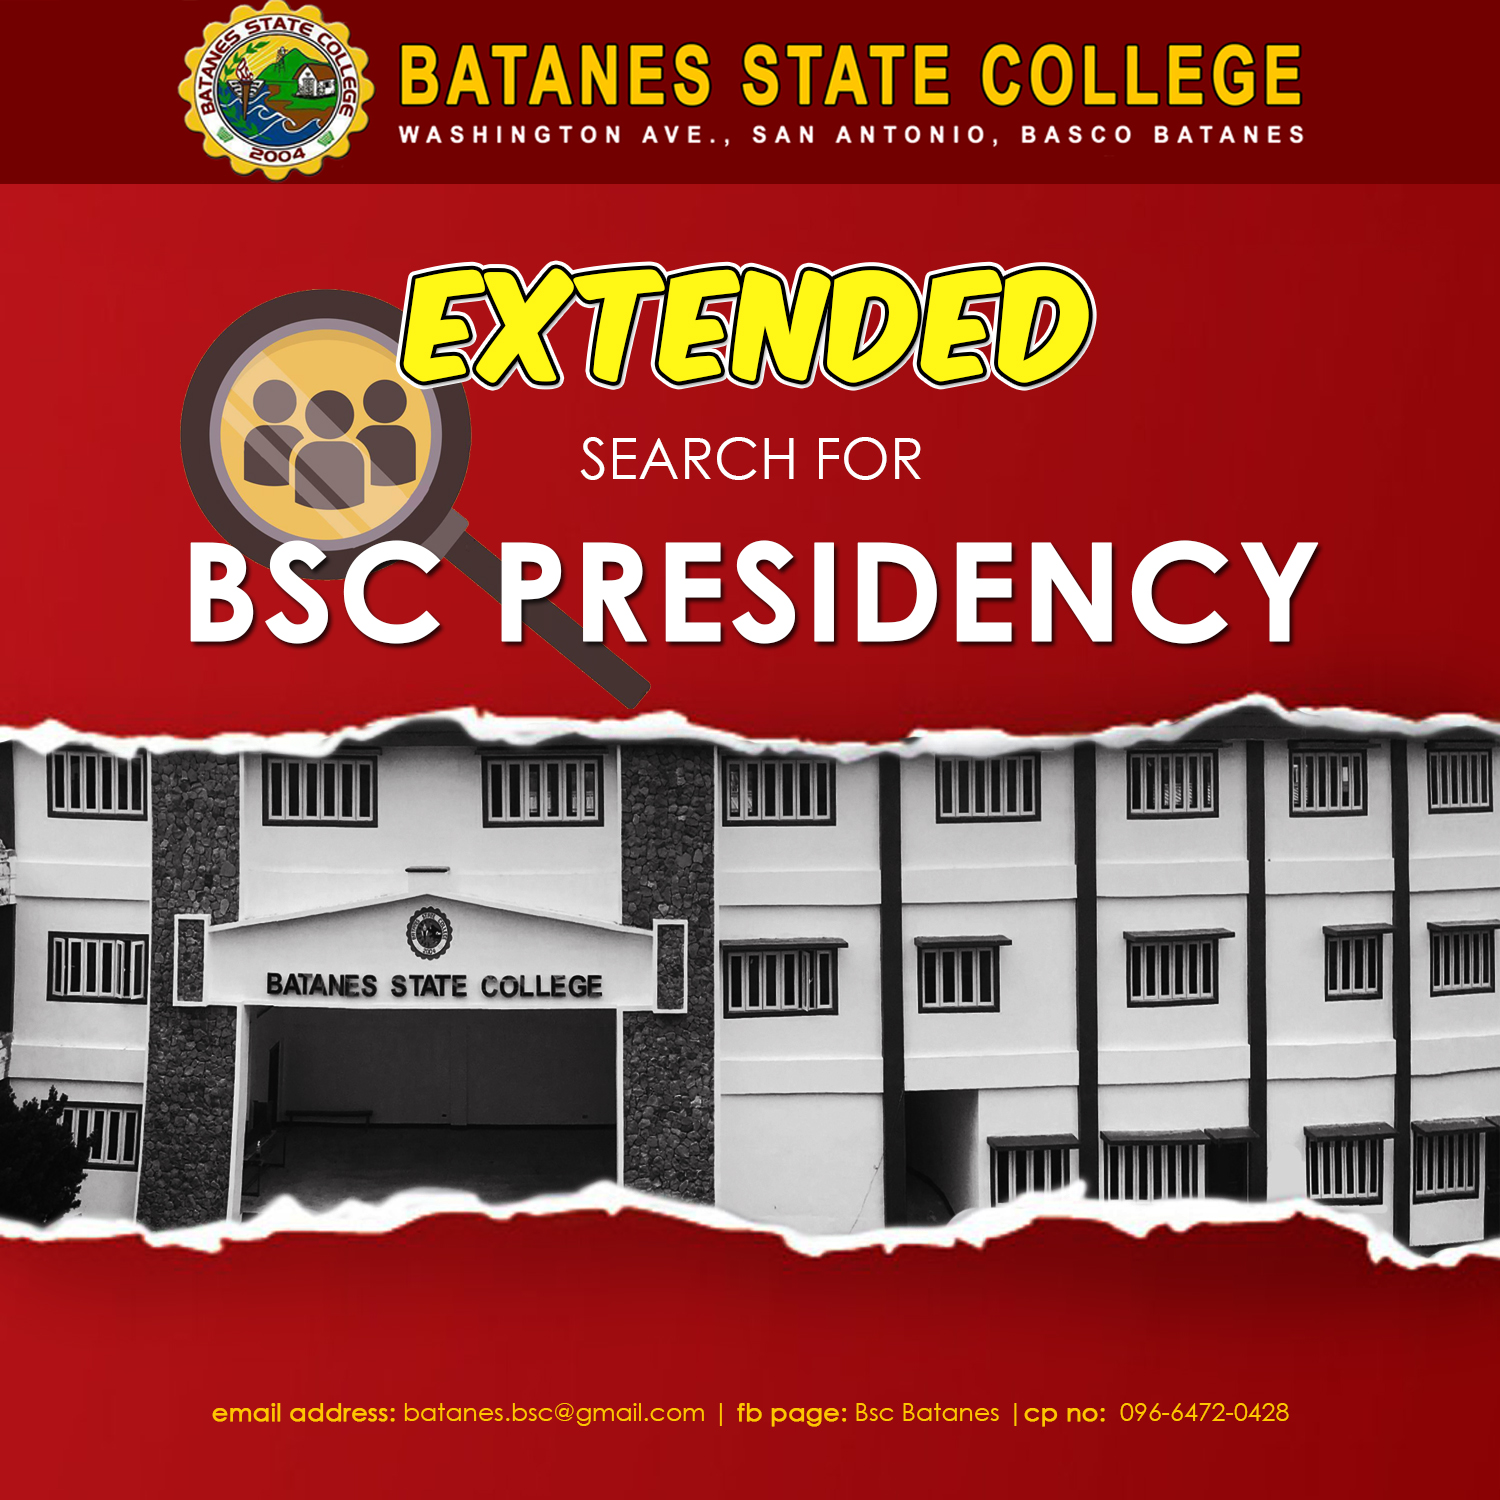 Search for BSC President Extended